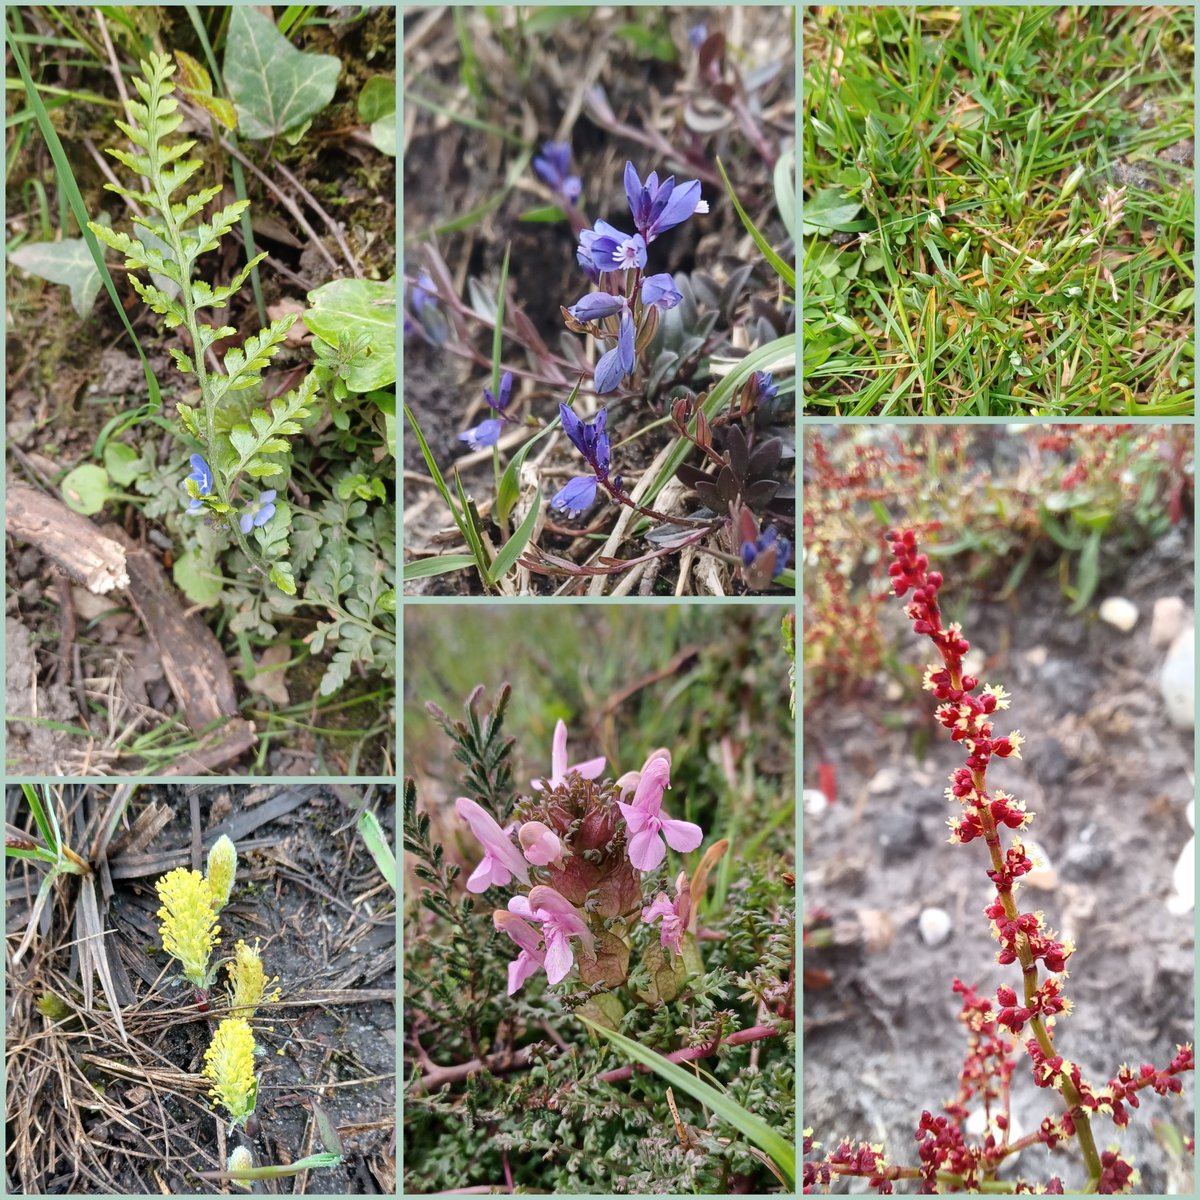 @wildflower_hour And some from the week, Coastal Oak woods and New Forest lawns with Black Spleenwort, Heath Milkwort, Upright Chickweed, Creeping Willow, Common Lousewort and Sheeps-sorrel. Early-purple and English Scurvygrass. #Wildflowerhour